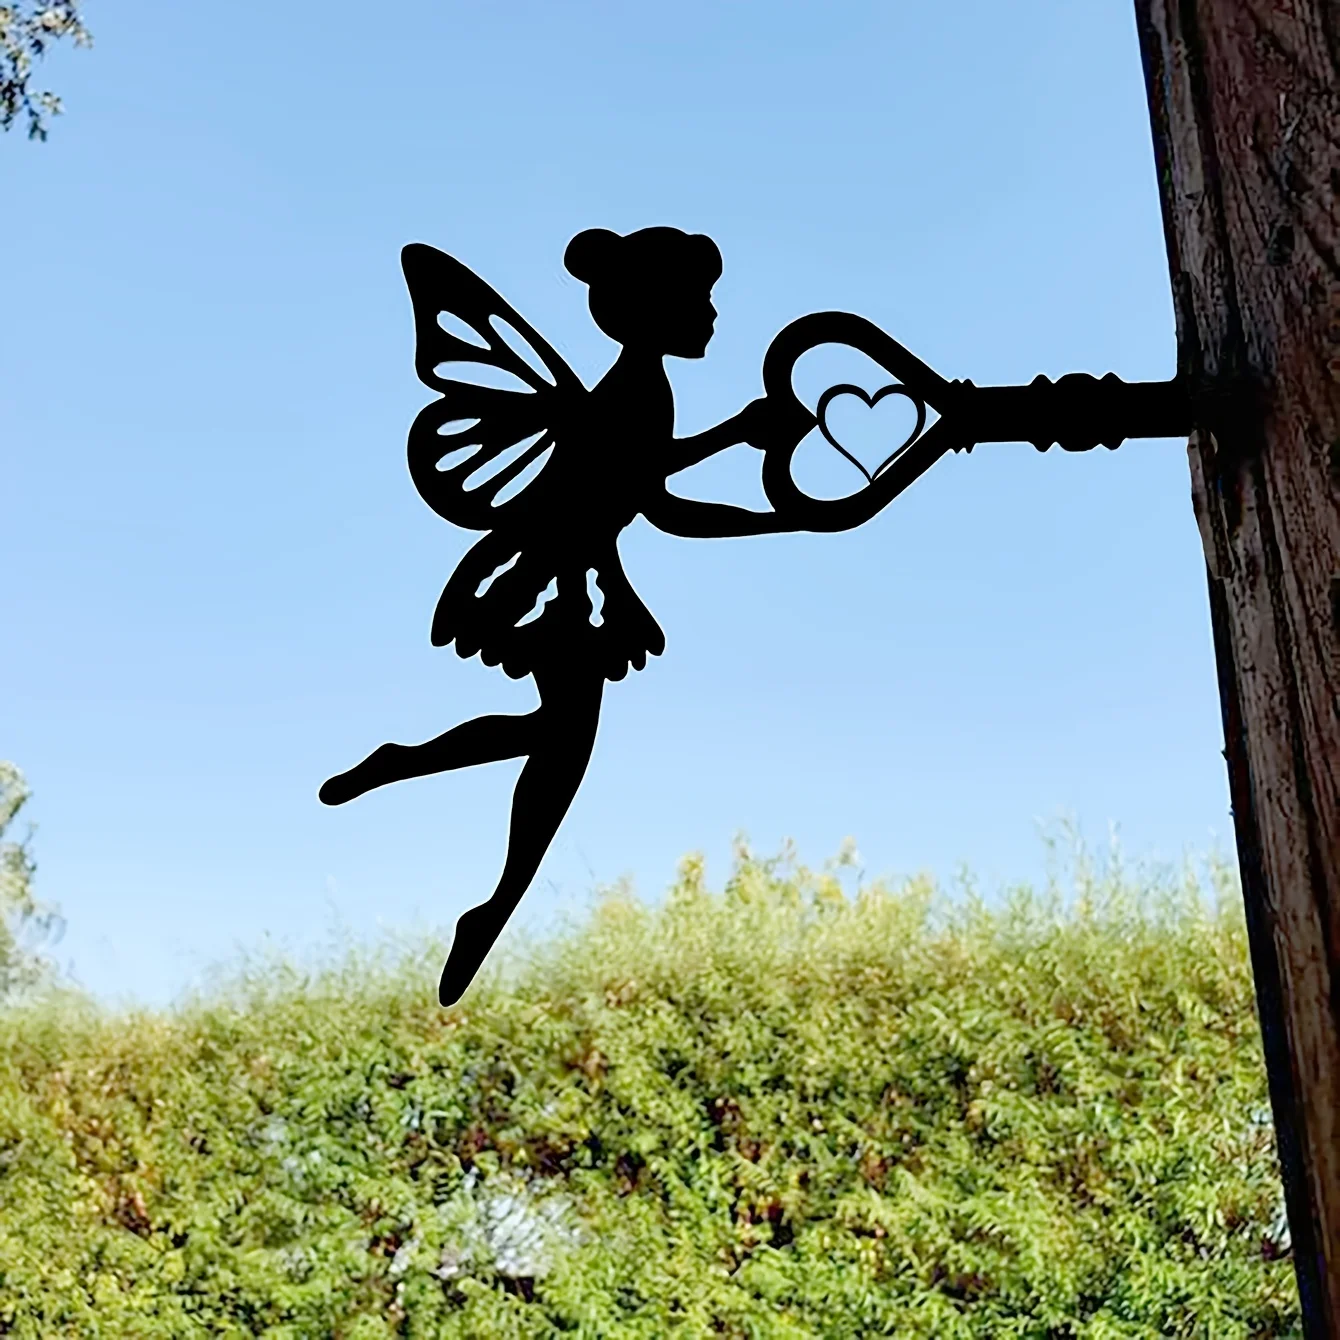 

1pc Angel Branch Steel Silhouette Metal Wall Art Home Garden Yard Patio Outdoor Statue Stake Decoration Perfect Birthdays Gifts